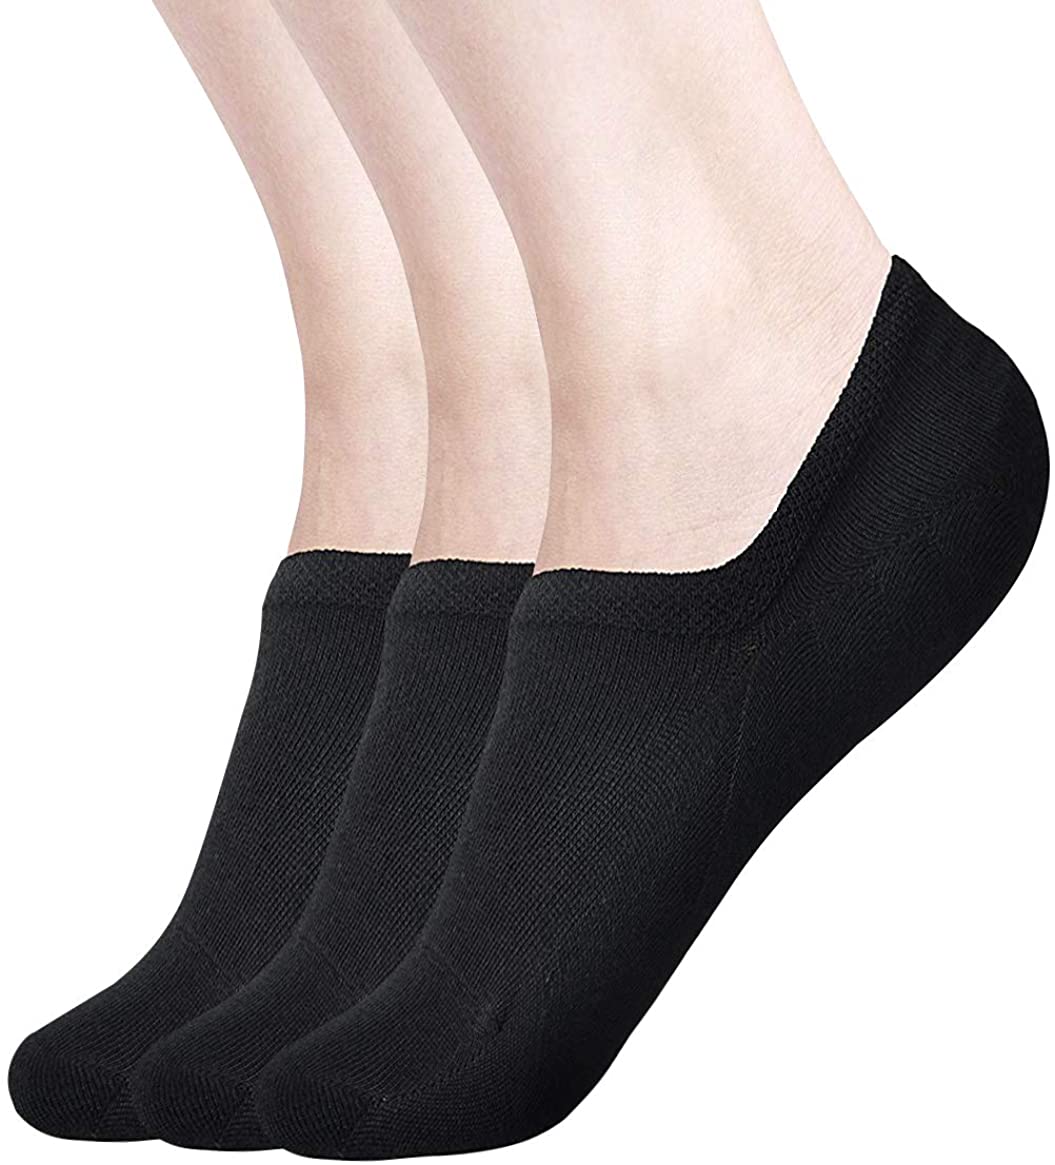 5 Pack Lace Cotton Non Slip Flat Boat Invisible Low Cut Liners Sports Ankle Socks Womens No Show Socks